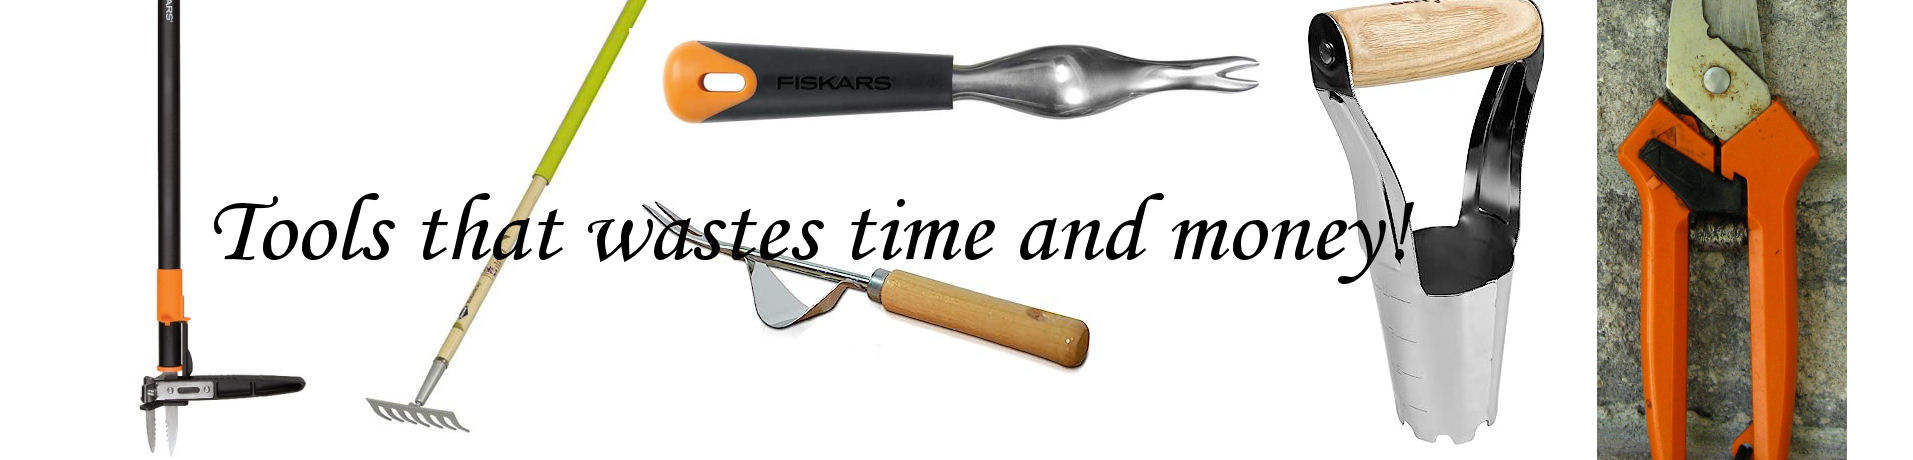 tools that are a waste of time and money banner